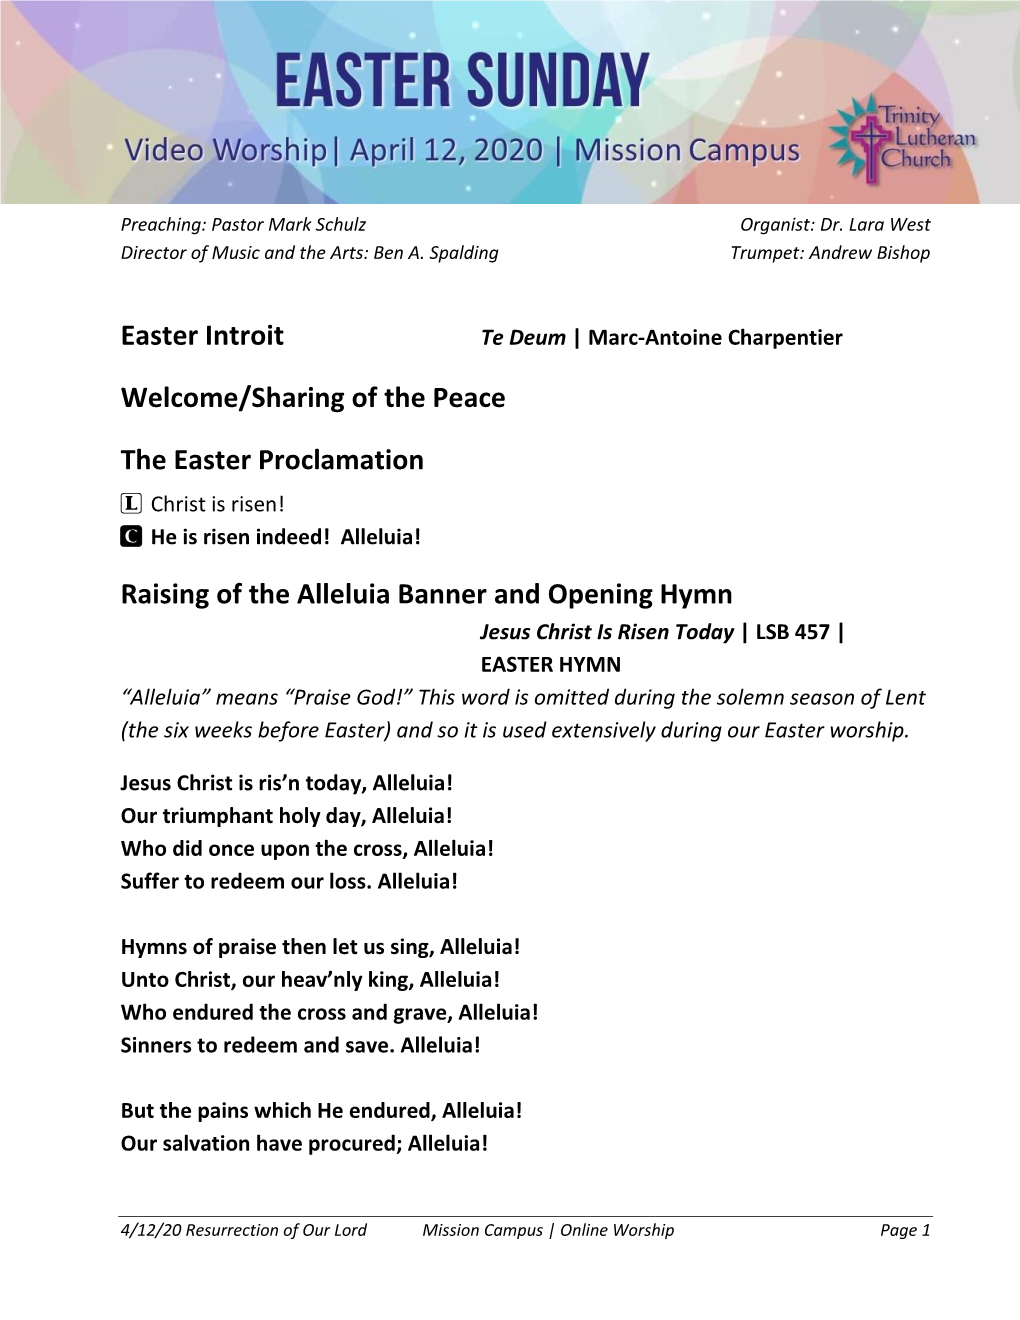 Easter Introit Welcome/Sharing of the Peace the Easter Proclamation